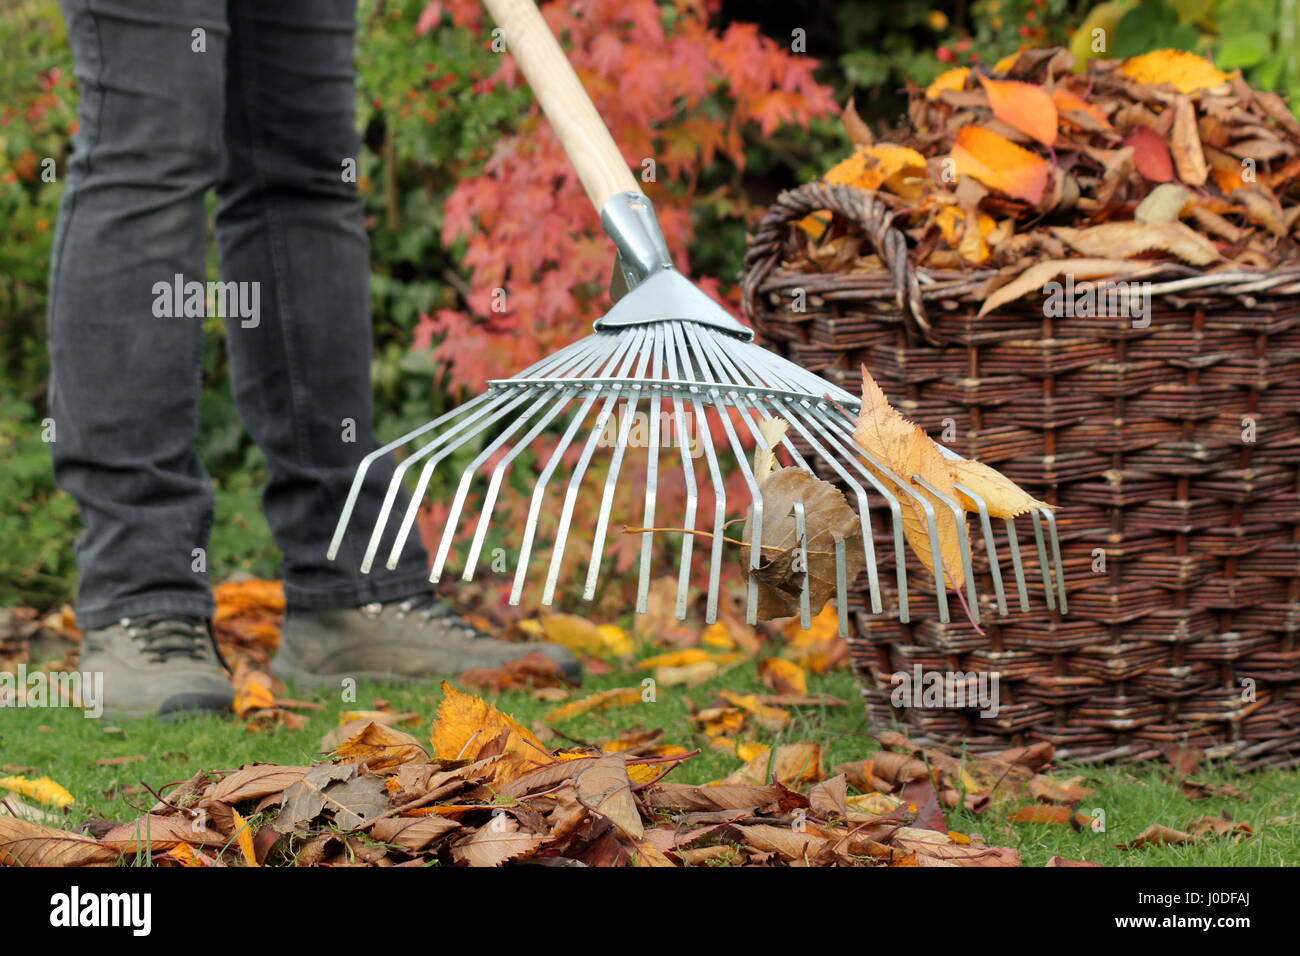 A female gardener rakes up fallen cherry tree leaves (prunus) into a woven basket from a garden lawn as part of autumn lawn maintenance tasks -October Stock Photo